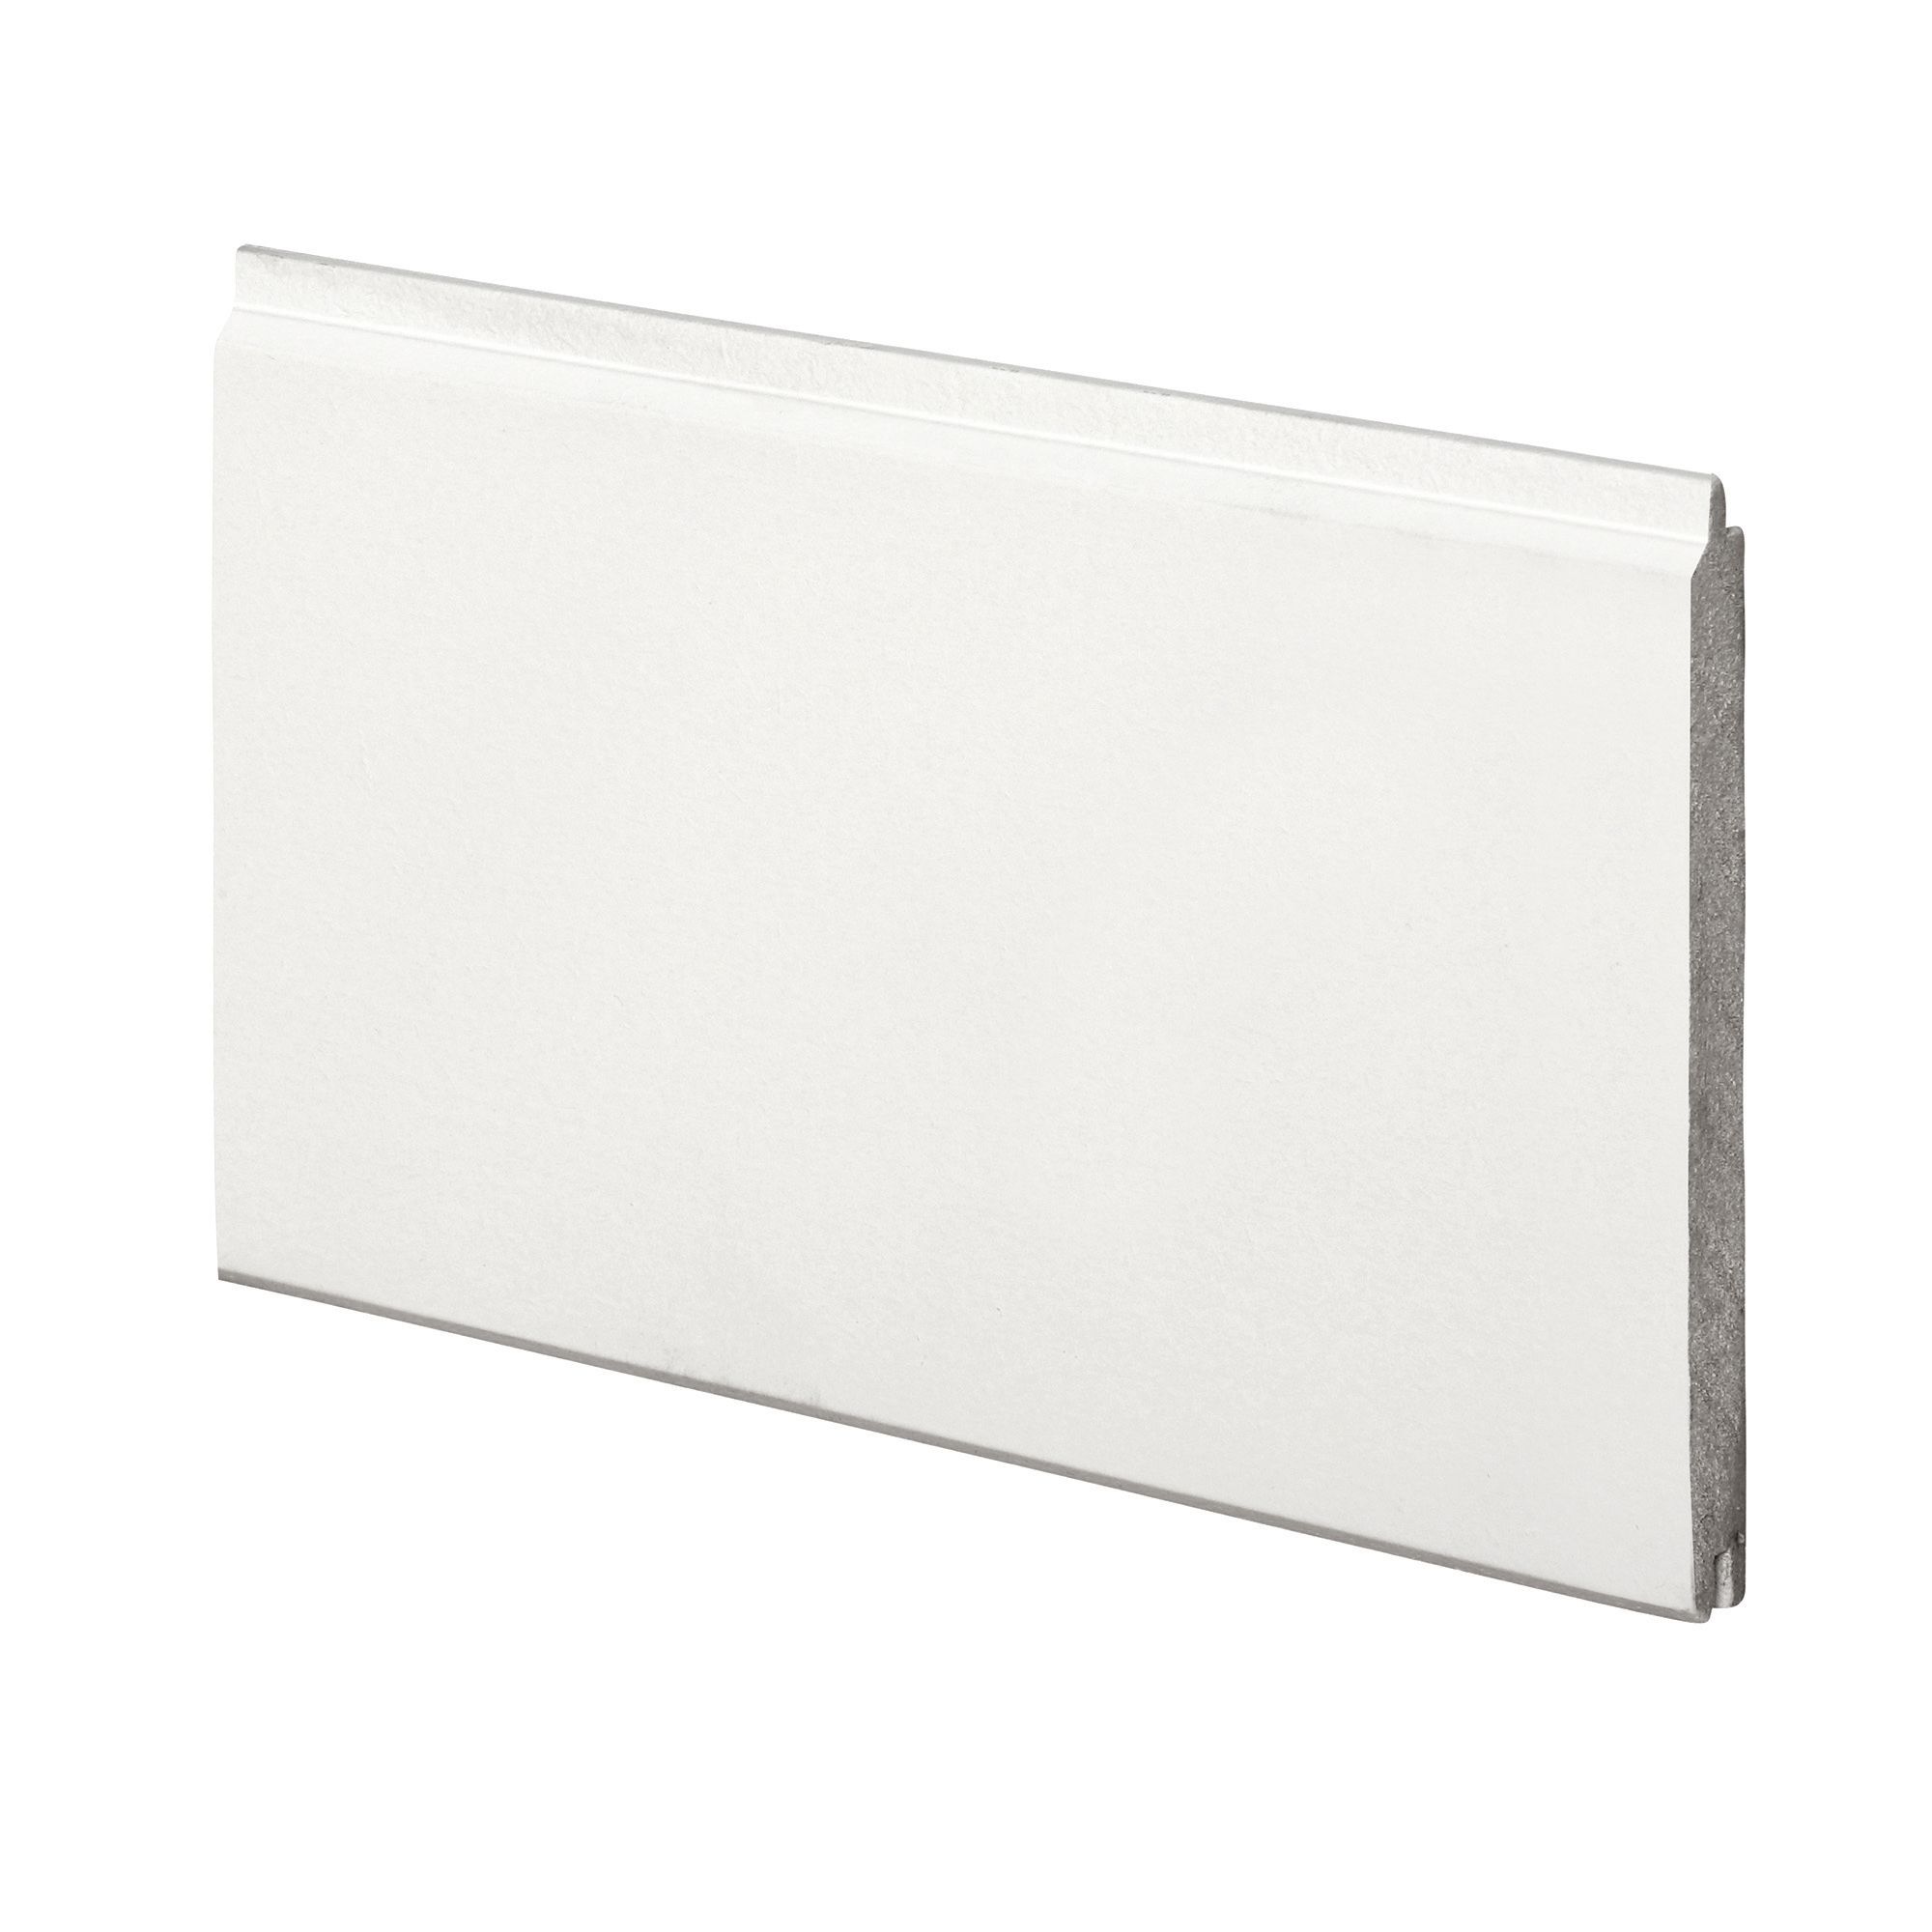 Image of Wickes V-jointed Primed MDF Cladding - 12mm x 94mm x 900mm